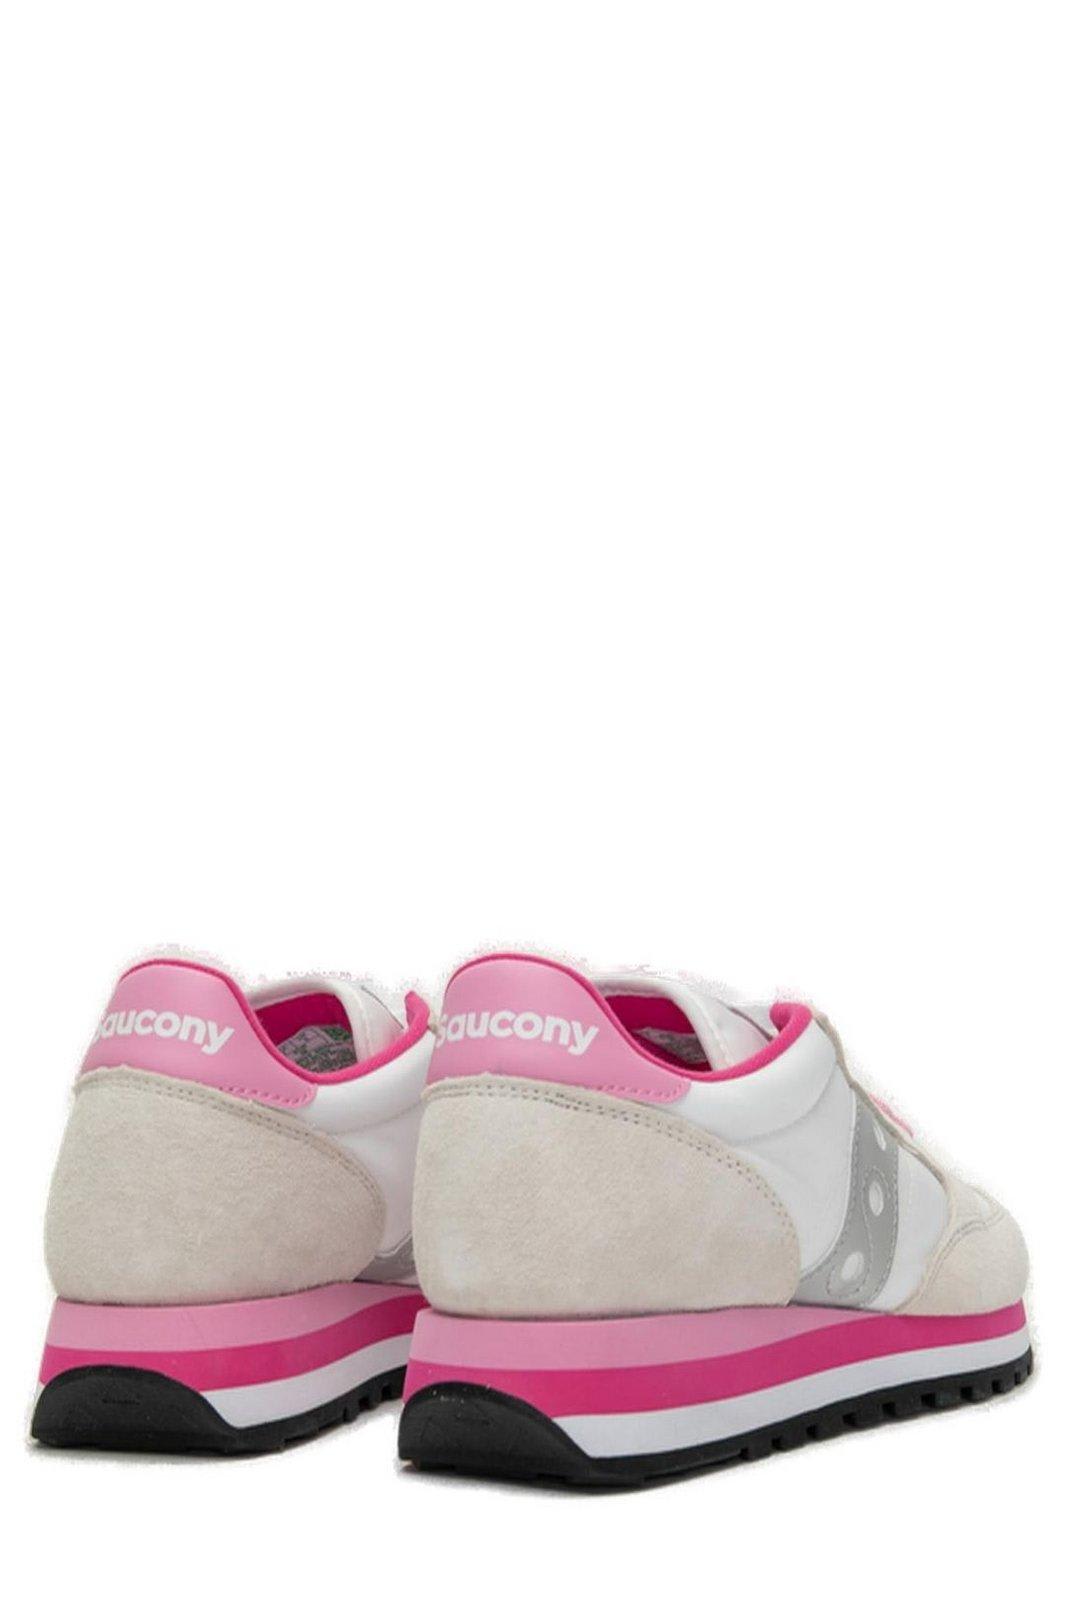 Shop Saucony Jazz Triple Panelled Sneakers In White/grey/pink